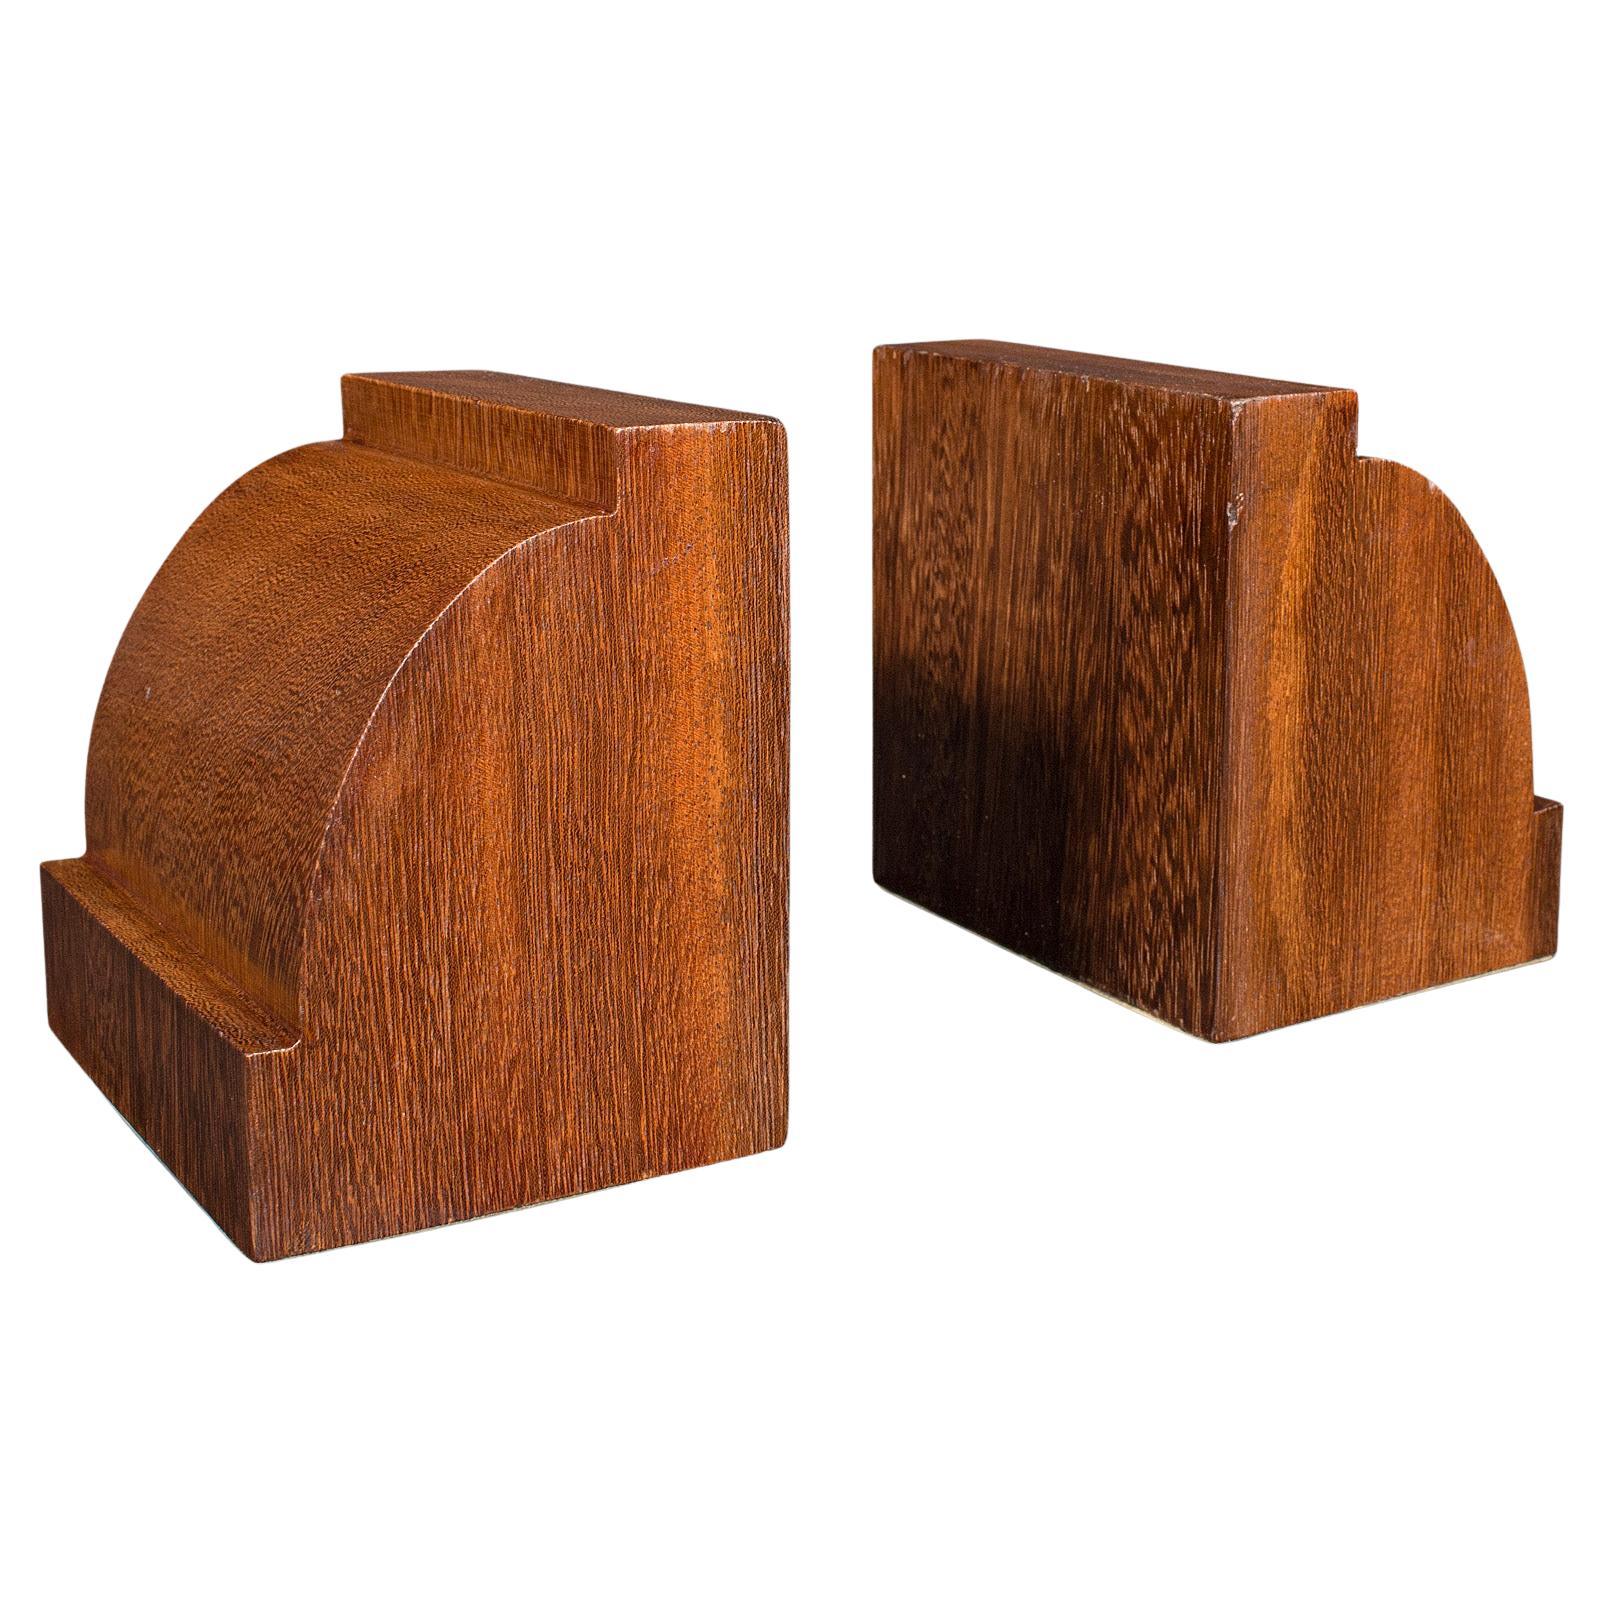 Pair of Antique Executive Desk Bookends, English, Book Rest, Edwardian, C.1910 For Sale